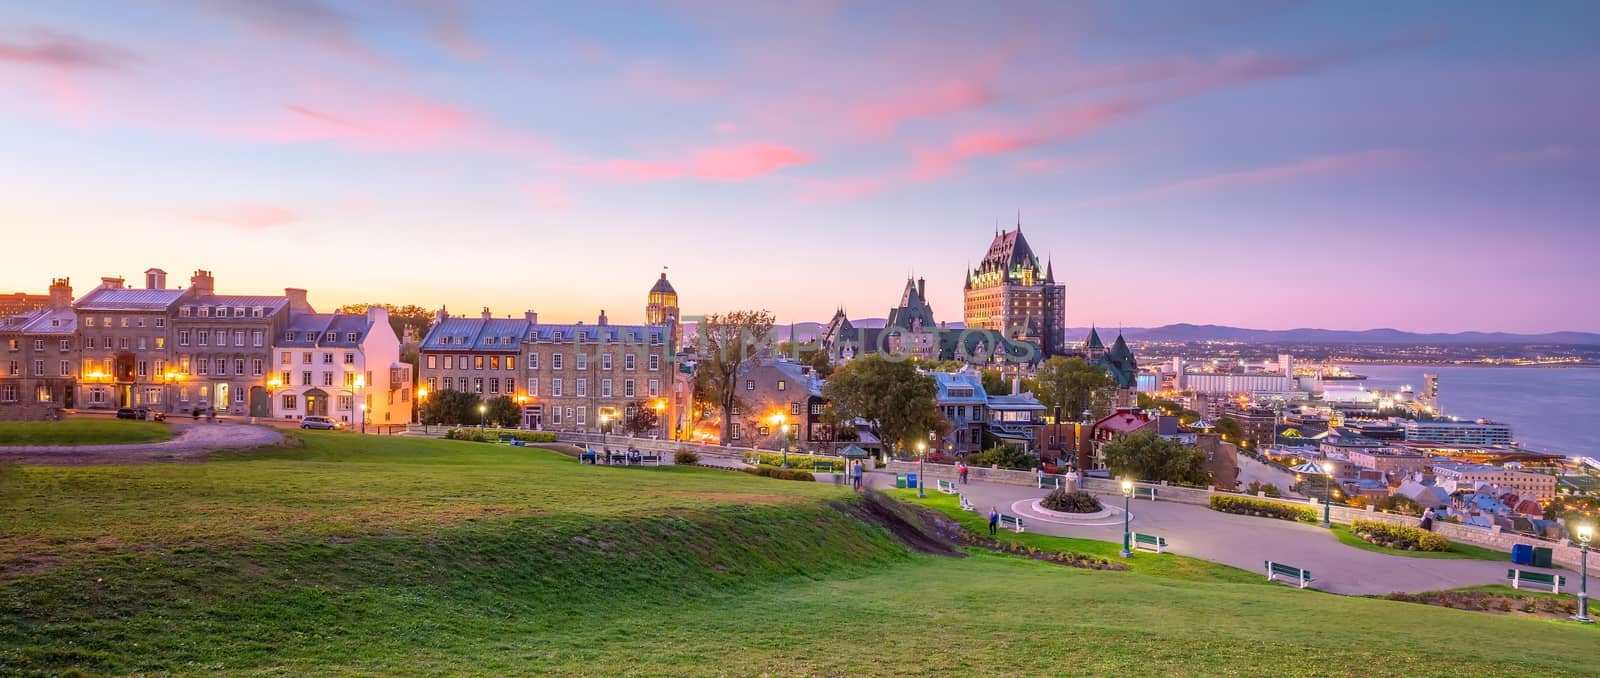 Panoramic view of Quebec City skyline in Canada by f11photo